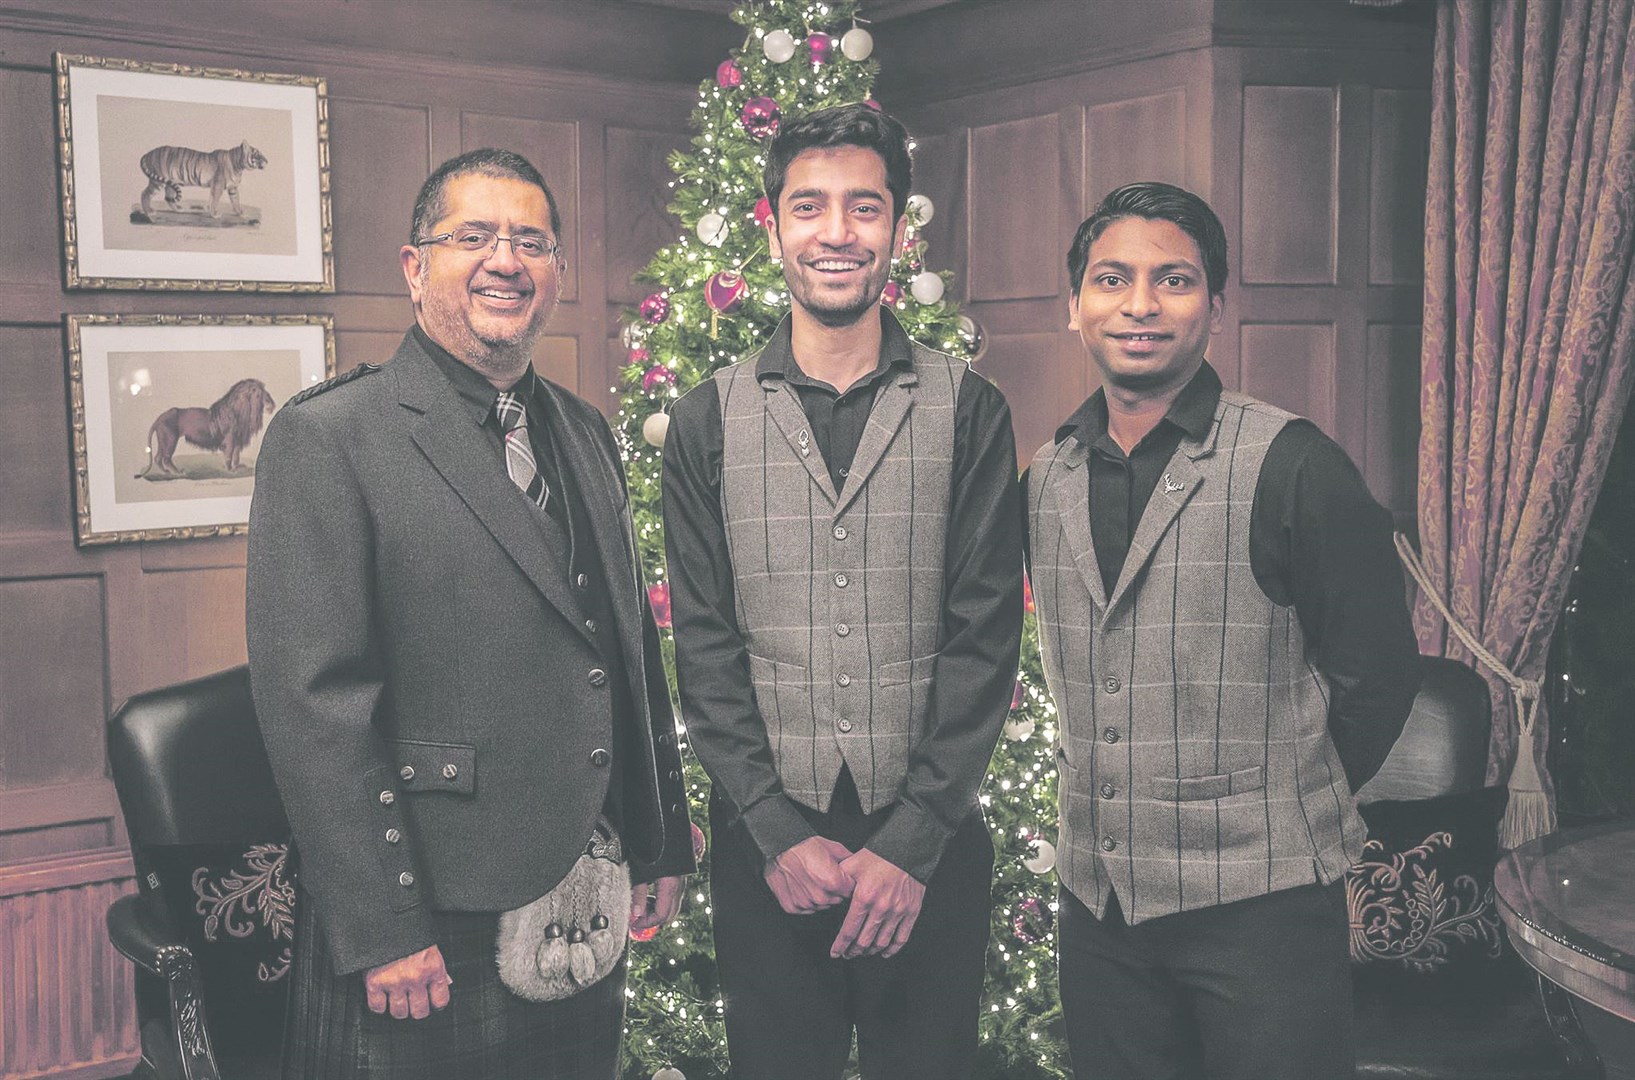 Ruchir (left) and his team aim to create a unique experience.